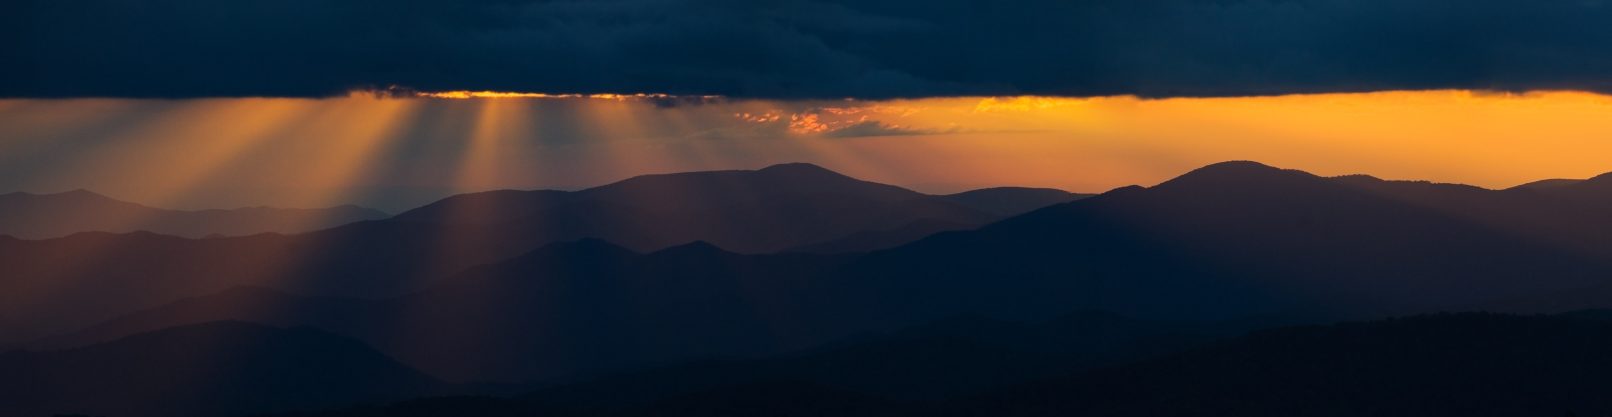 Sunset rays from clouds at Great Smoky Mountains